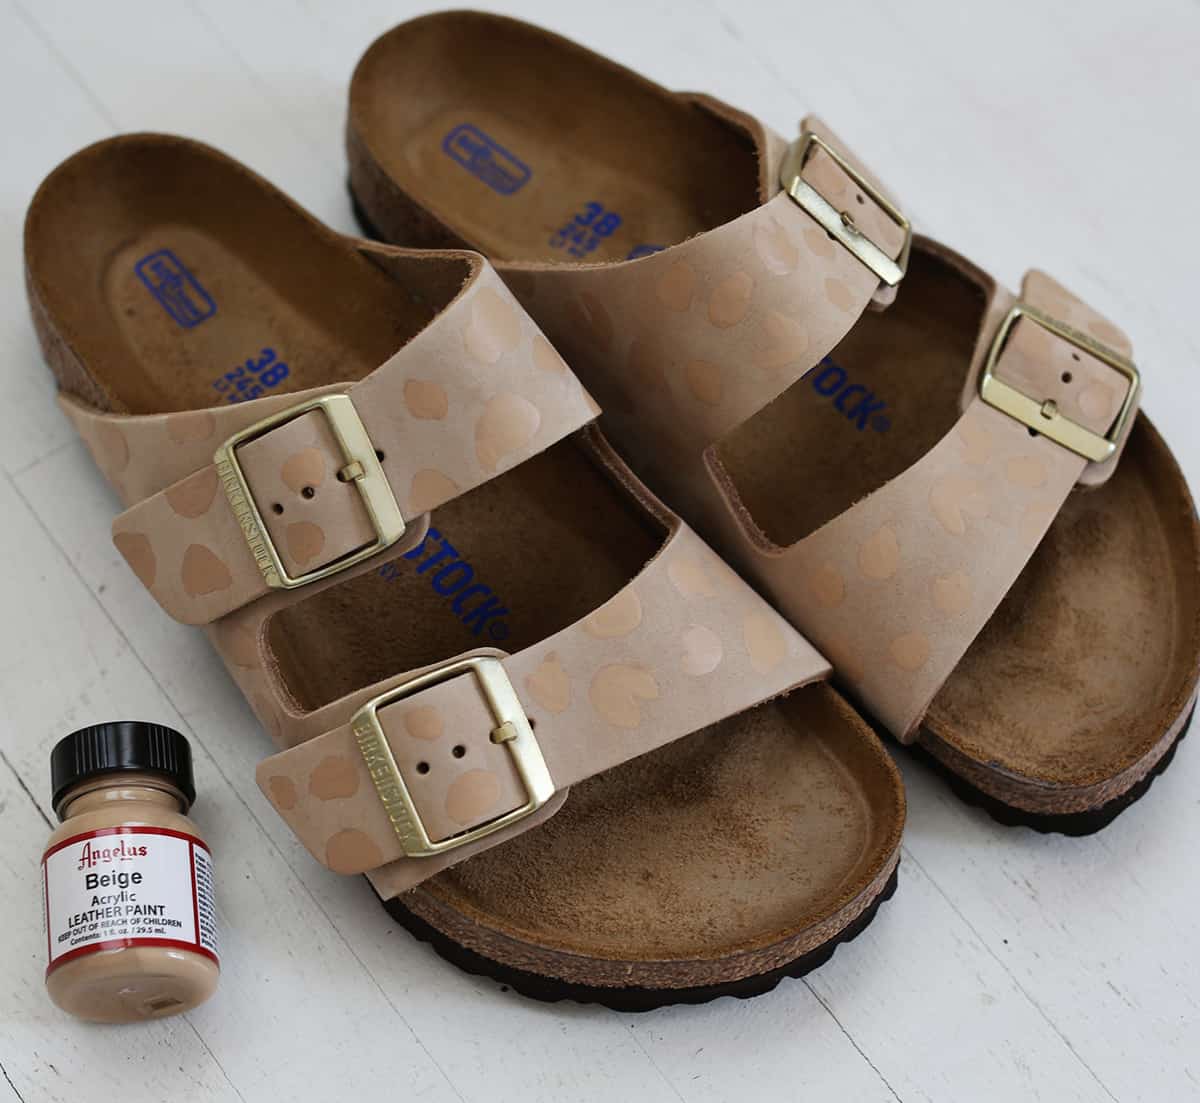 bottle of leather acrylic paint next to sandals